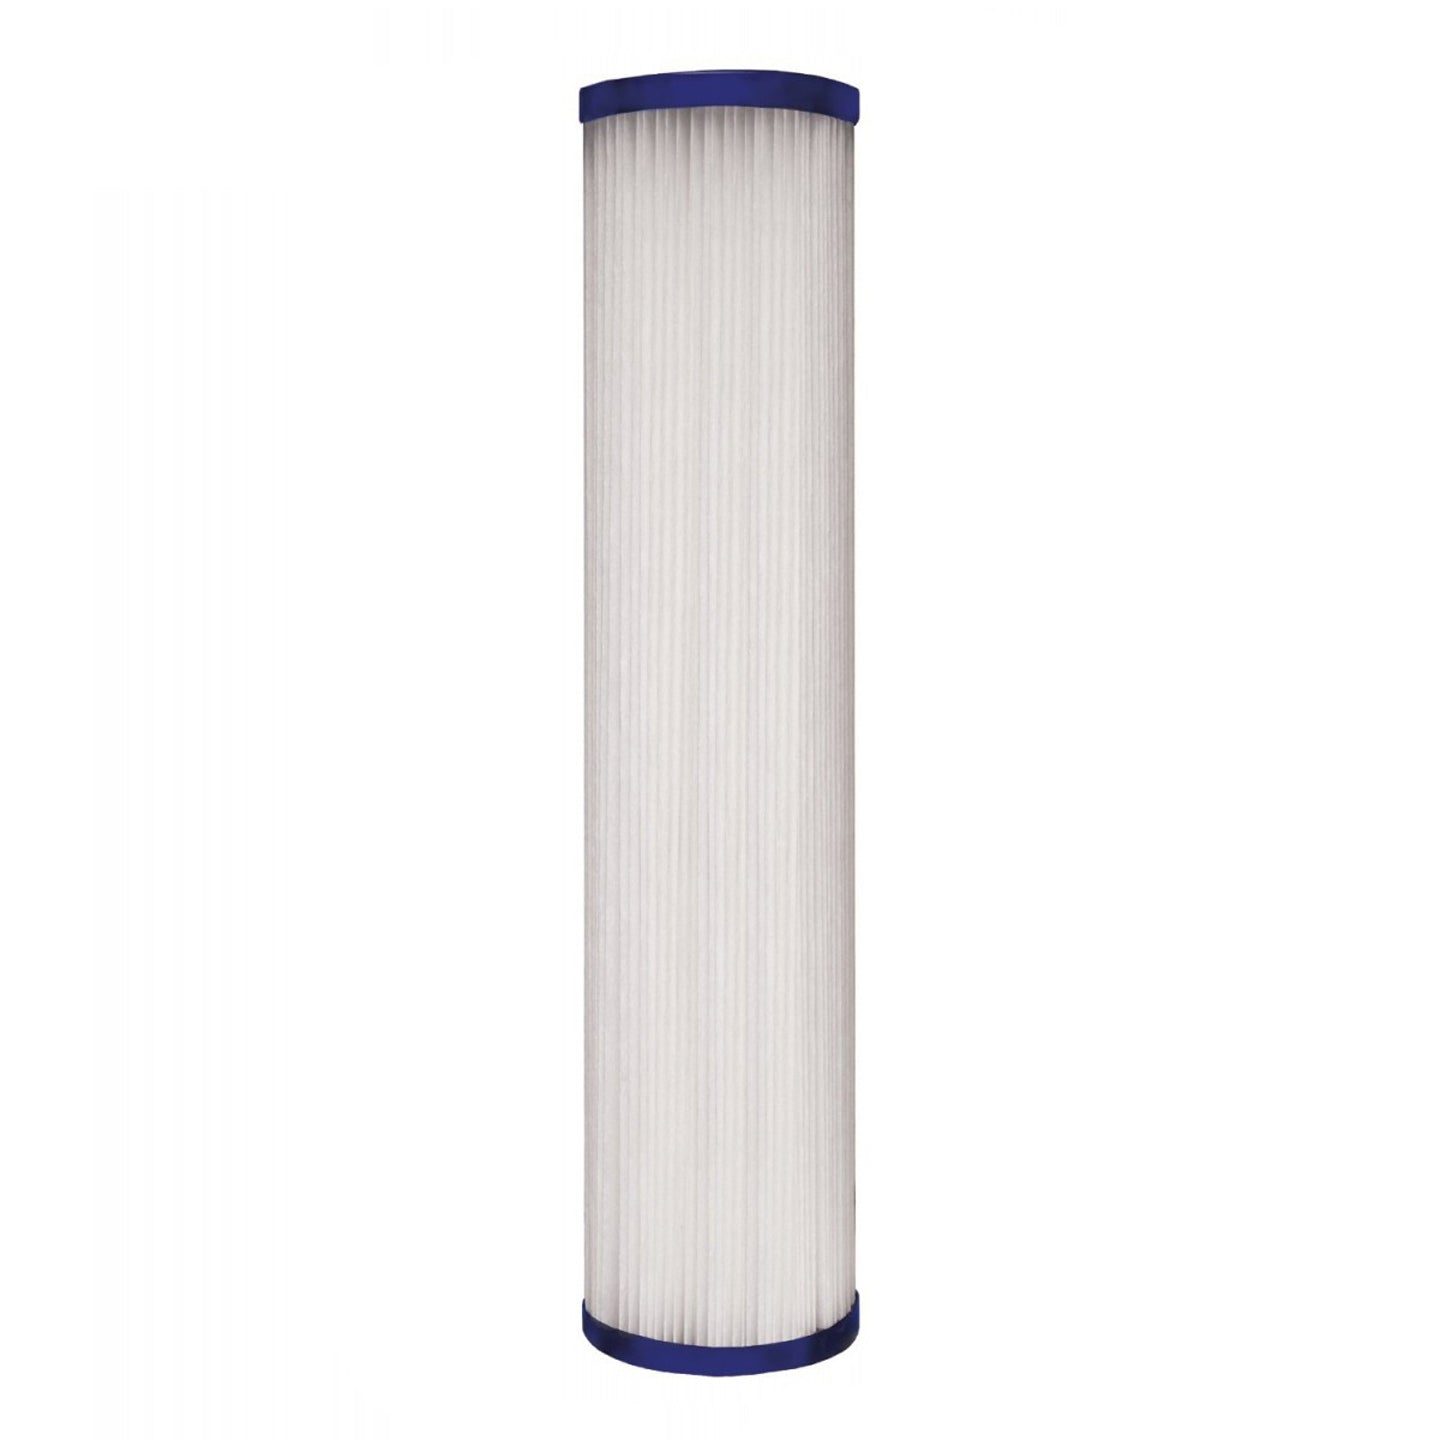 SPC-25-1005 Hydronix Comparable Pleated Sediment Water Filter by Tier1 (2-Pack)